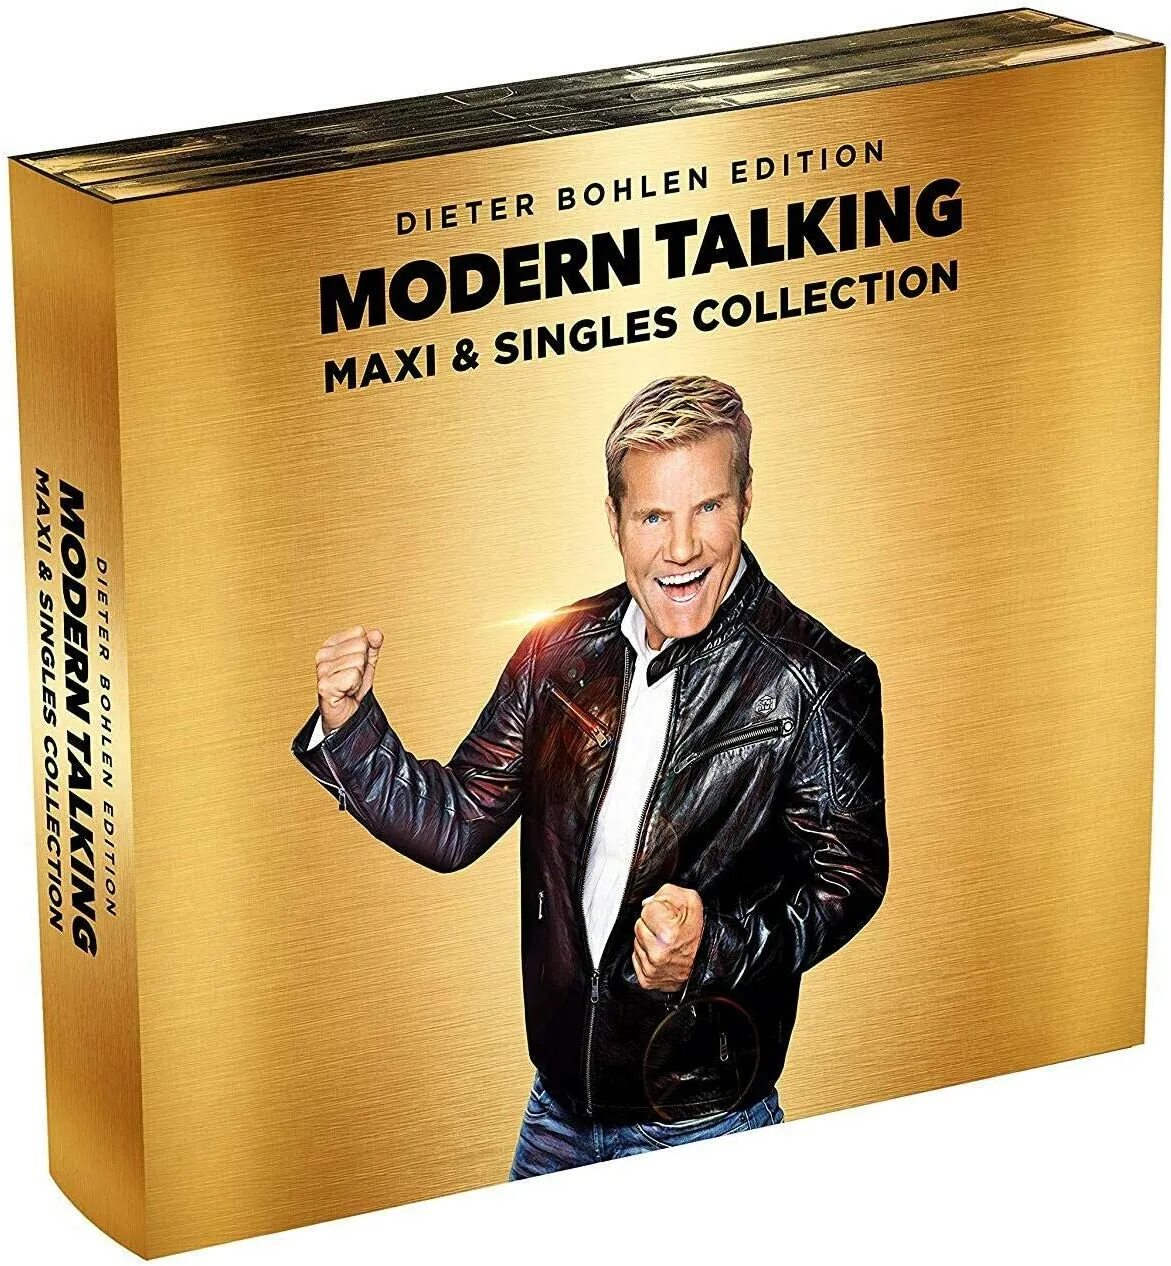 Blue System Maxi Singles collection. Blue System Maxi Singles collection 2019. Modern talking Maxi Singles collection. Modern talking Maxi Singles collection 2019.